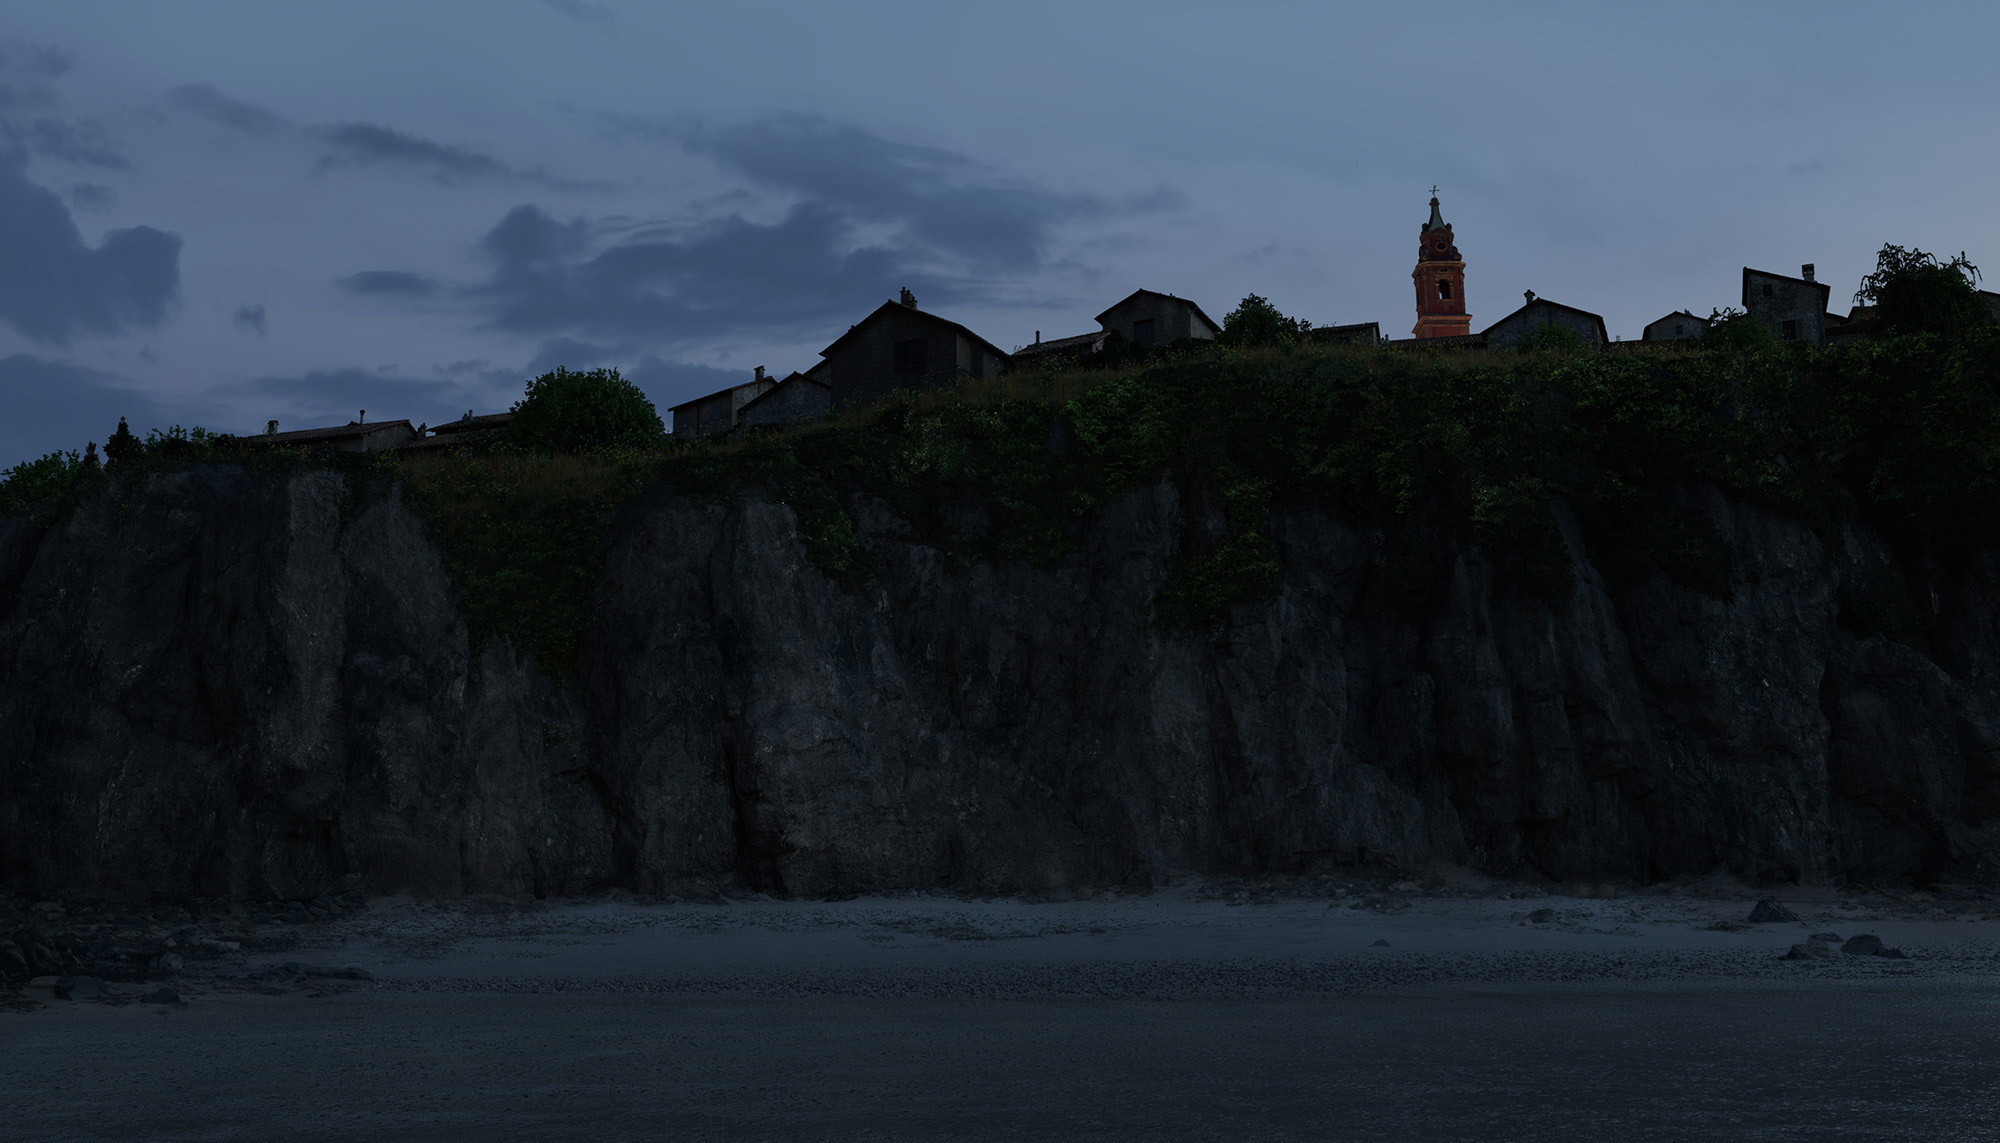 Italian town, view from the beach, matte painting. Cliffs texturing/replacement, beach dressing up and texturing, vegetation, buildings dirt and texturing pass, church detailing, sky 